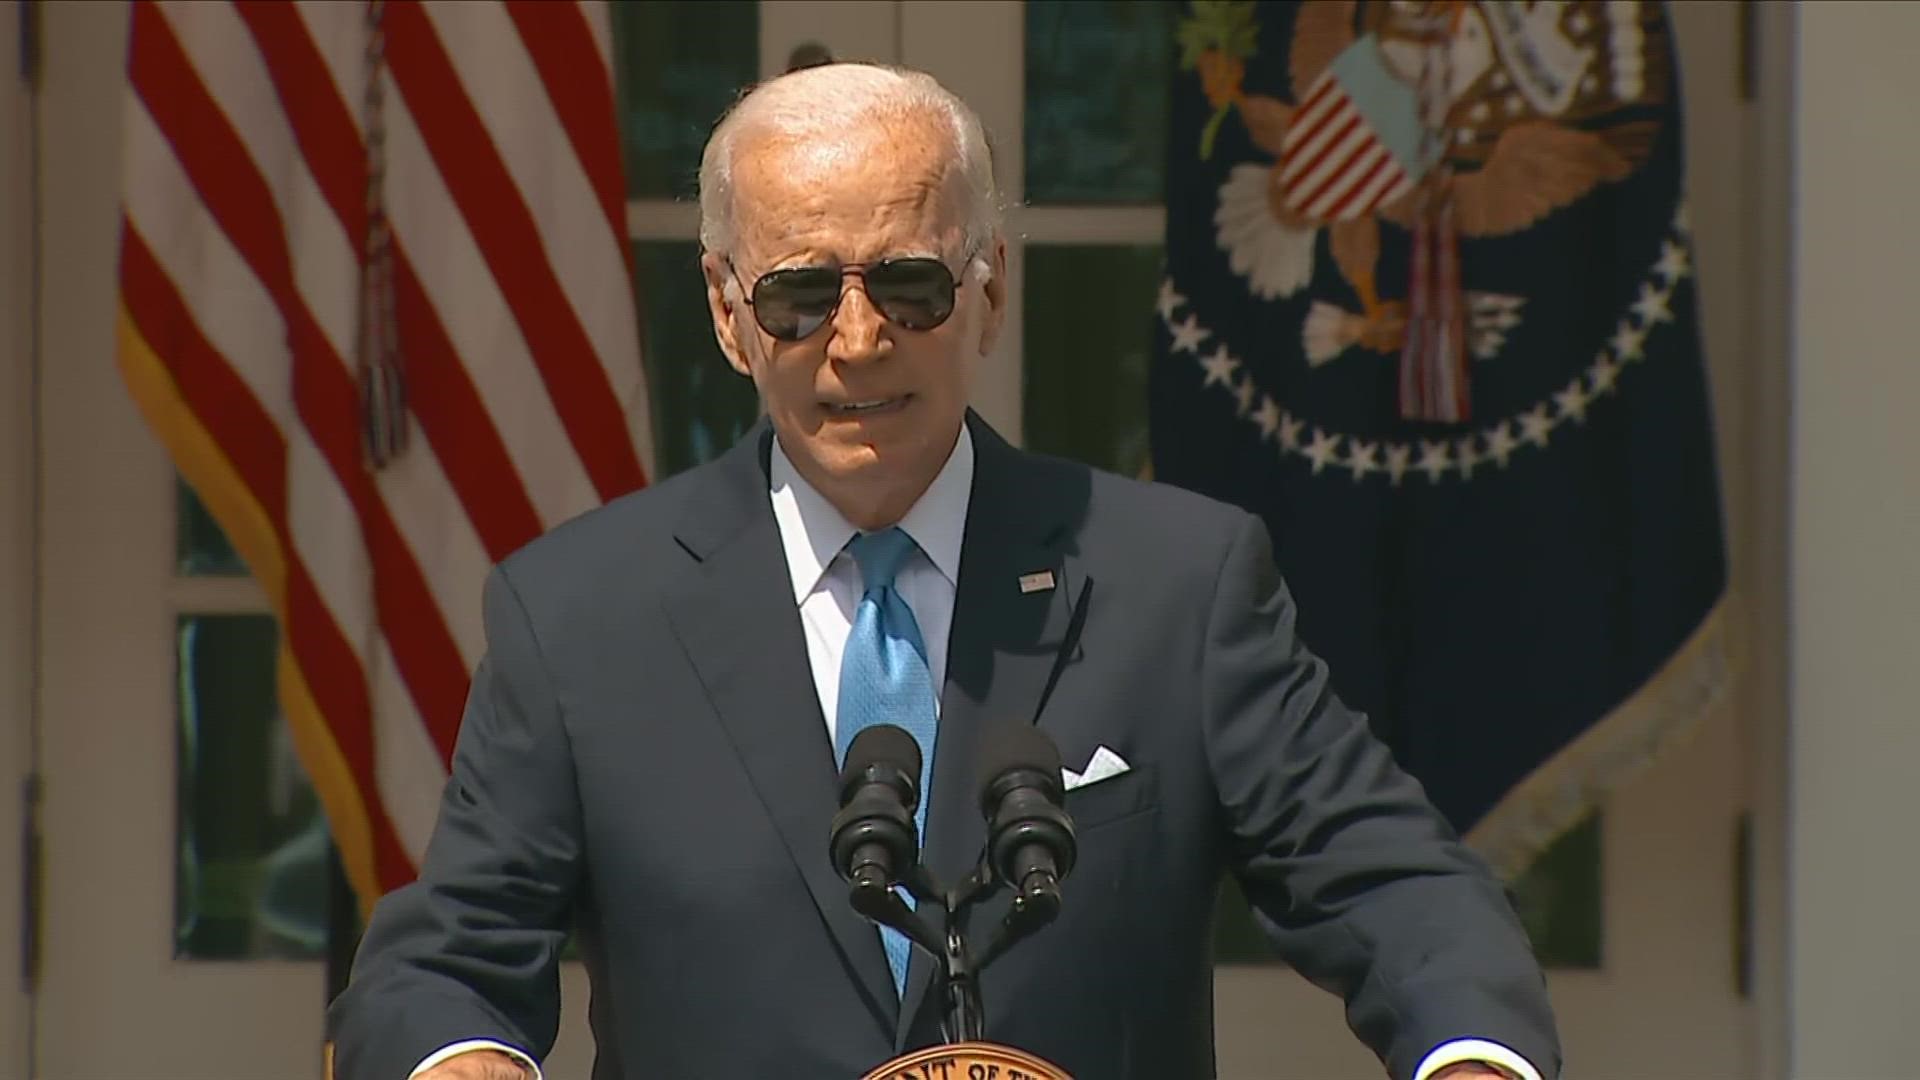 Biden said he faced the highly transmissible BA.5 variant and urged precautions for Americans who will be around crowds.